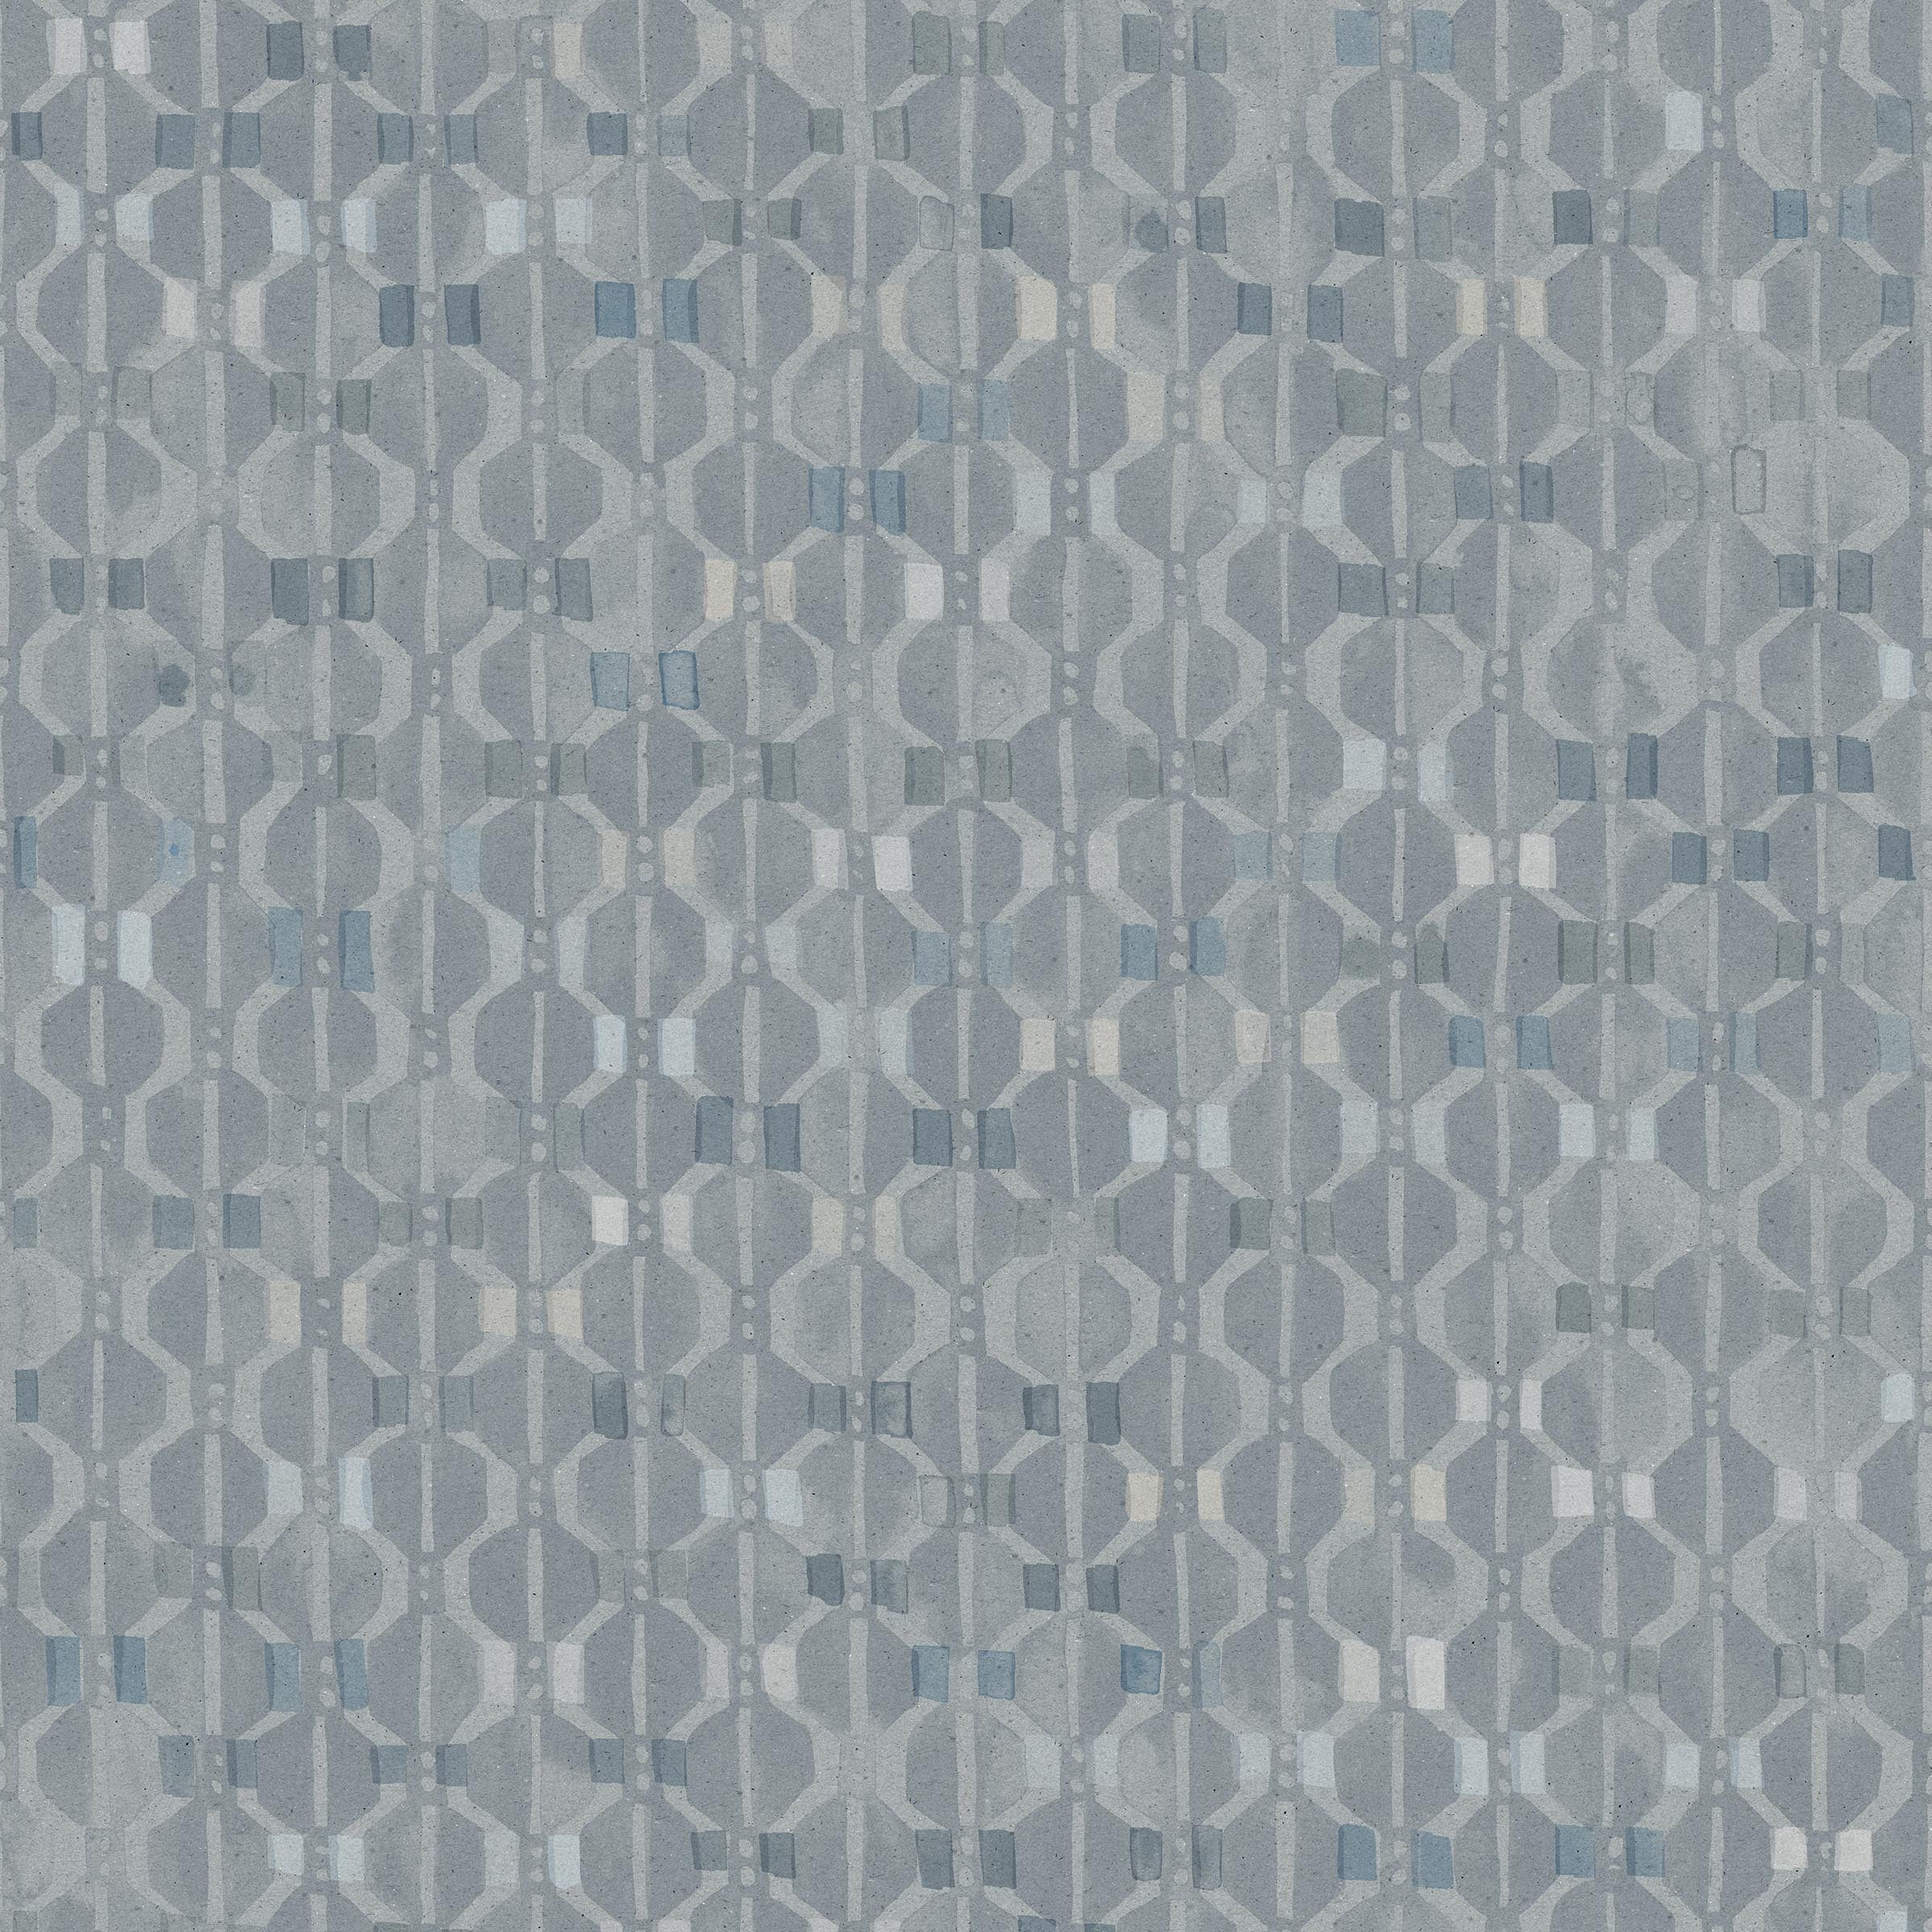 Detail of fabric in a geometric stripe pattern in shades of blue and gray.